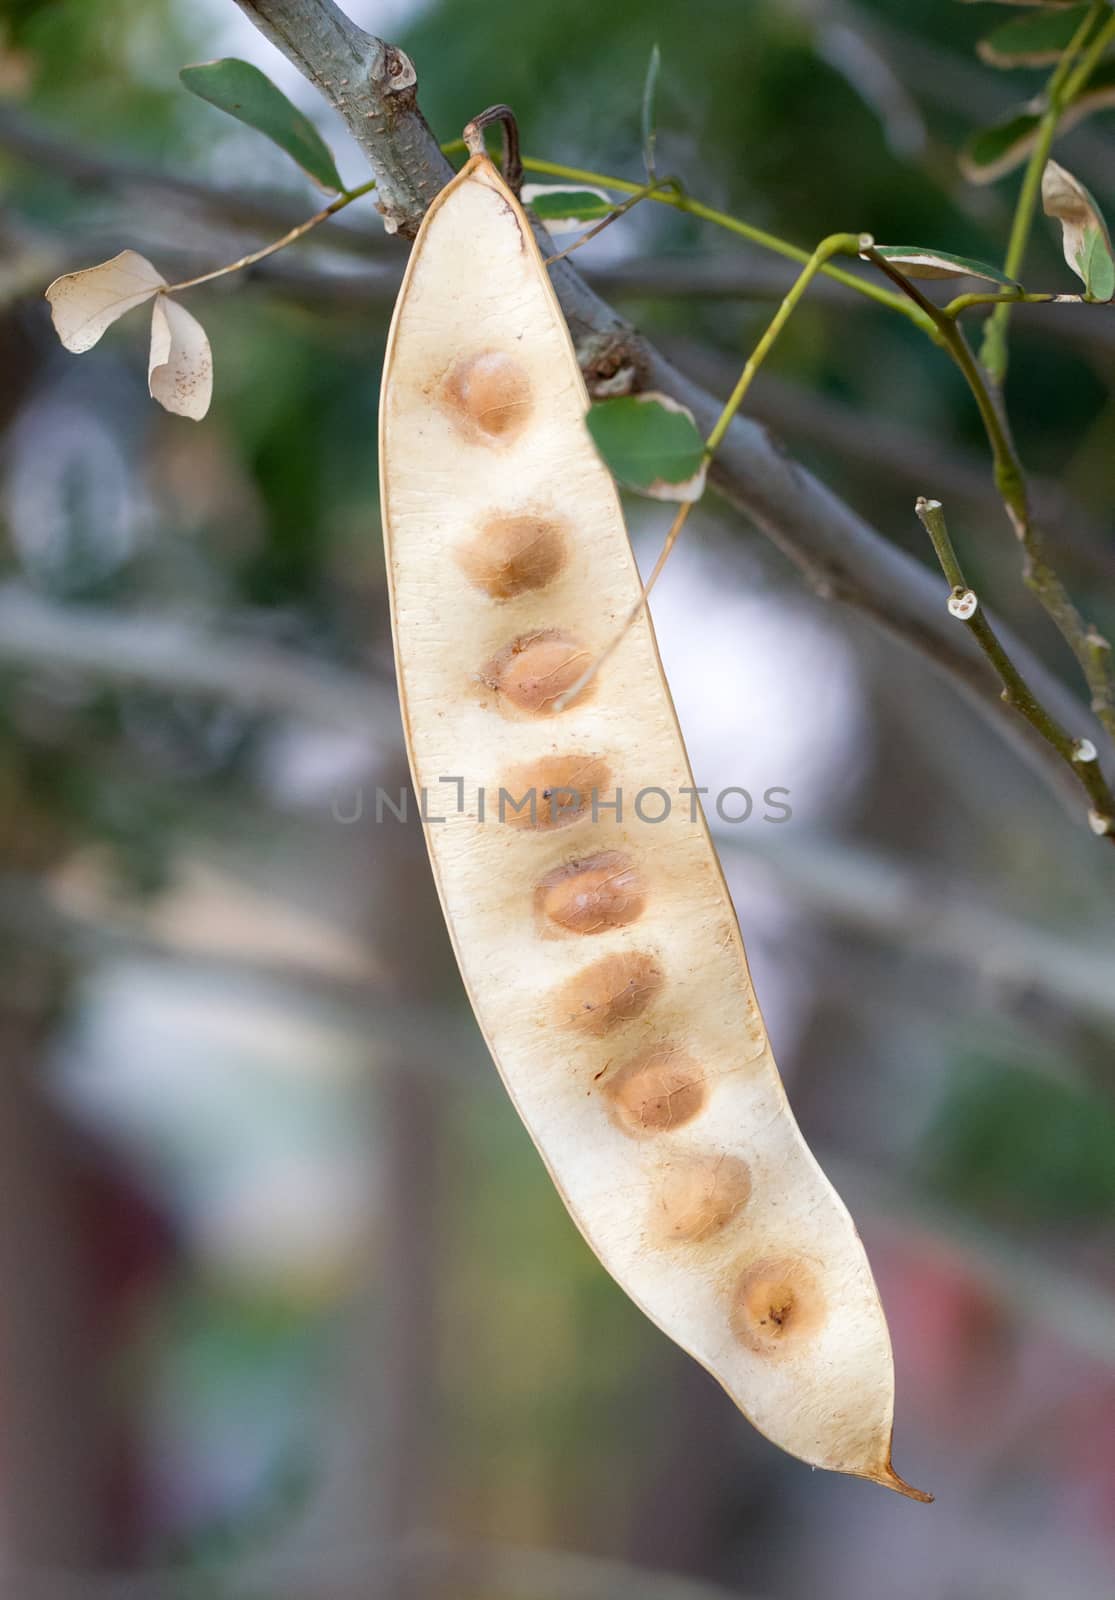 Seeds hanging in a tree, Madagascar, Africa